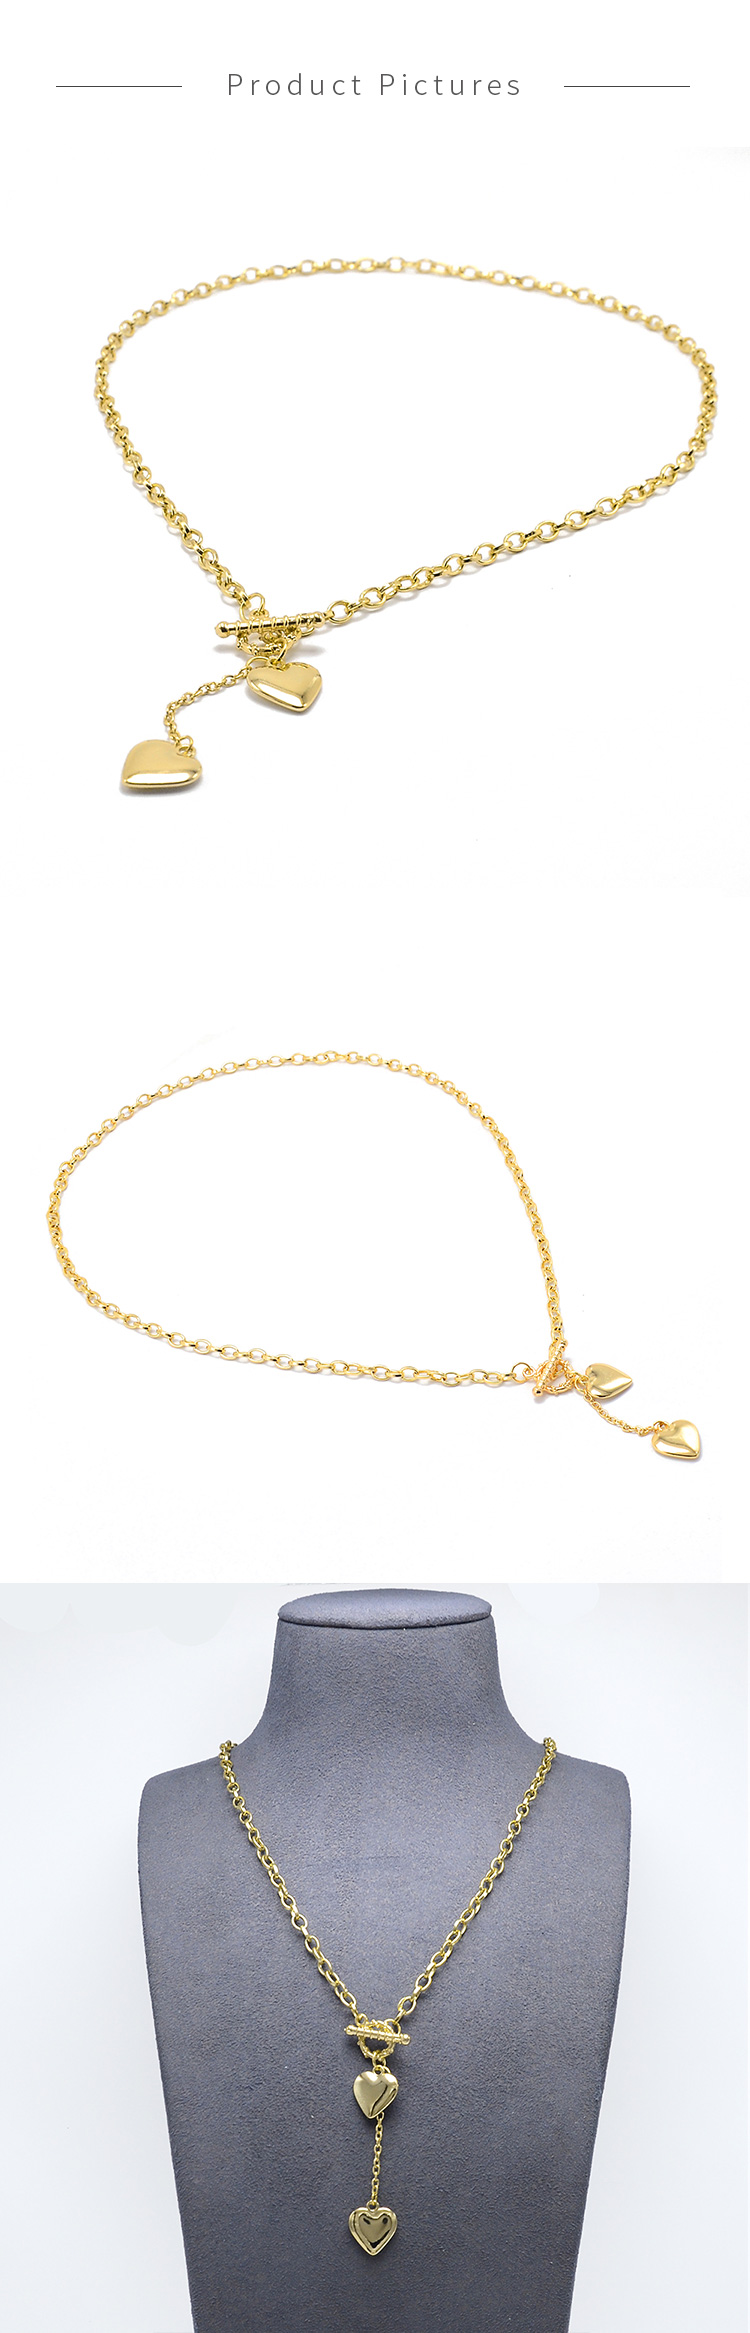 Gold Chian Necklace